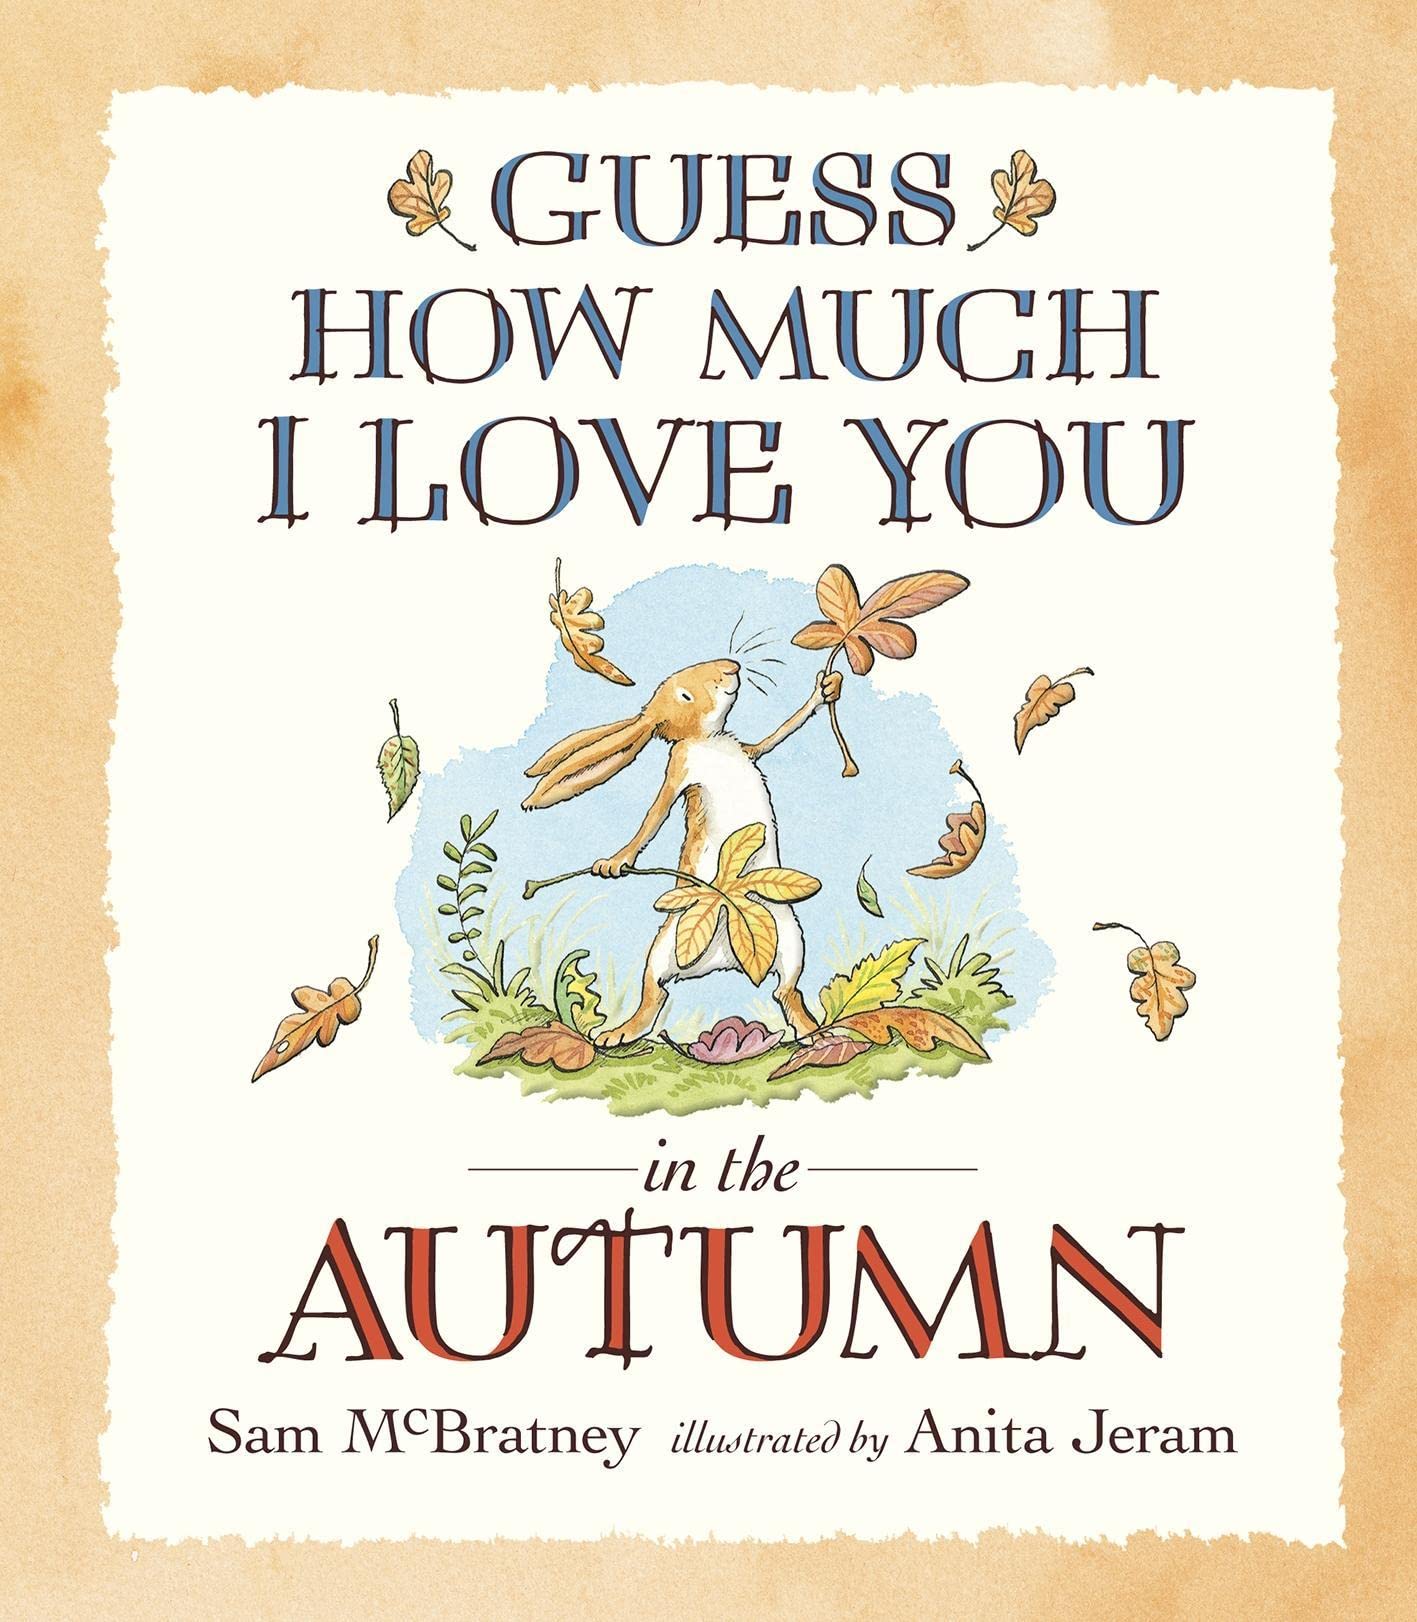 Guess How Much I Love You in the Autumn by Sam McBratney & Anita Jeram